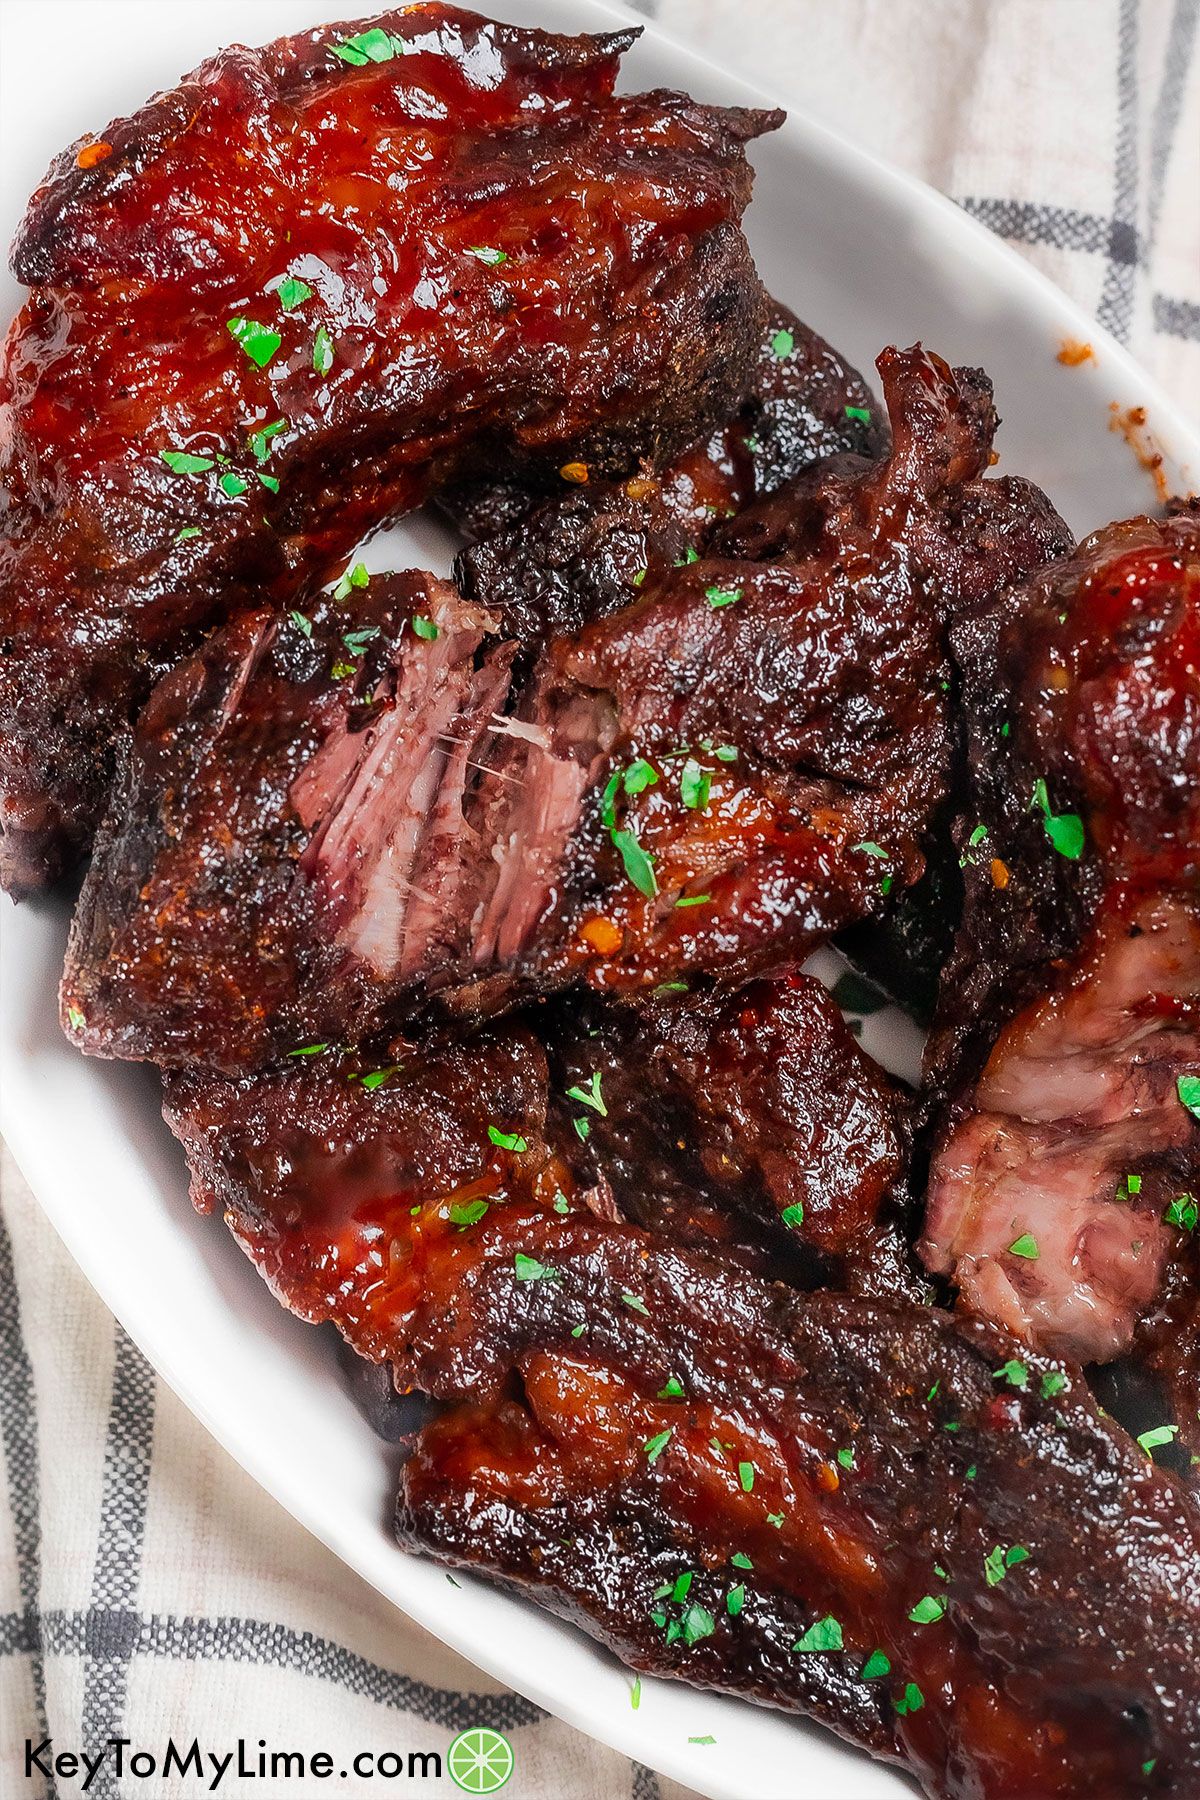 An overhead image of a platter full of garnished ribs.